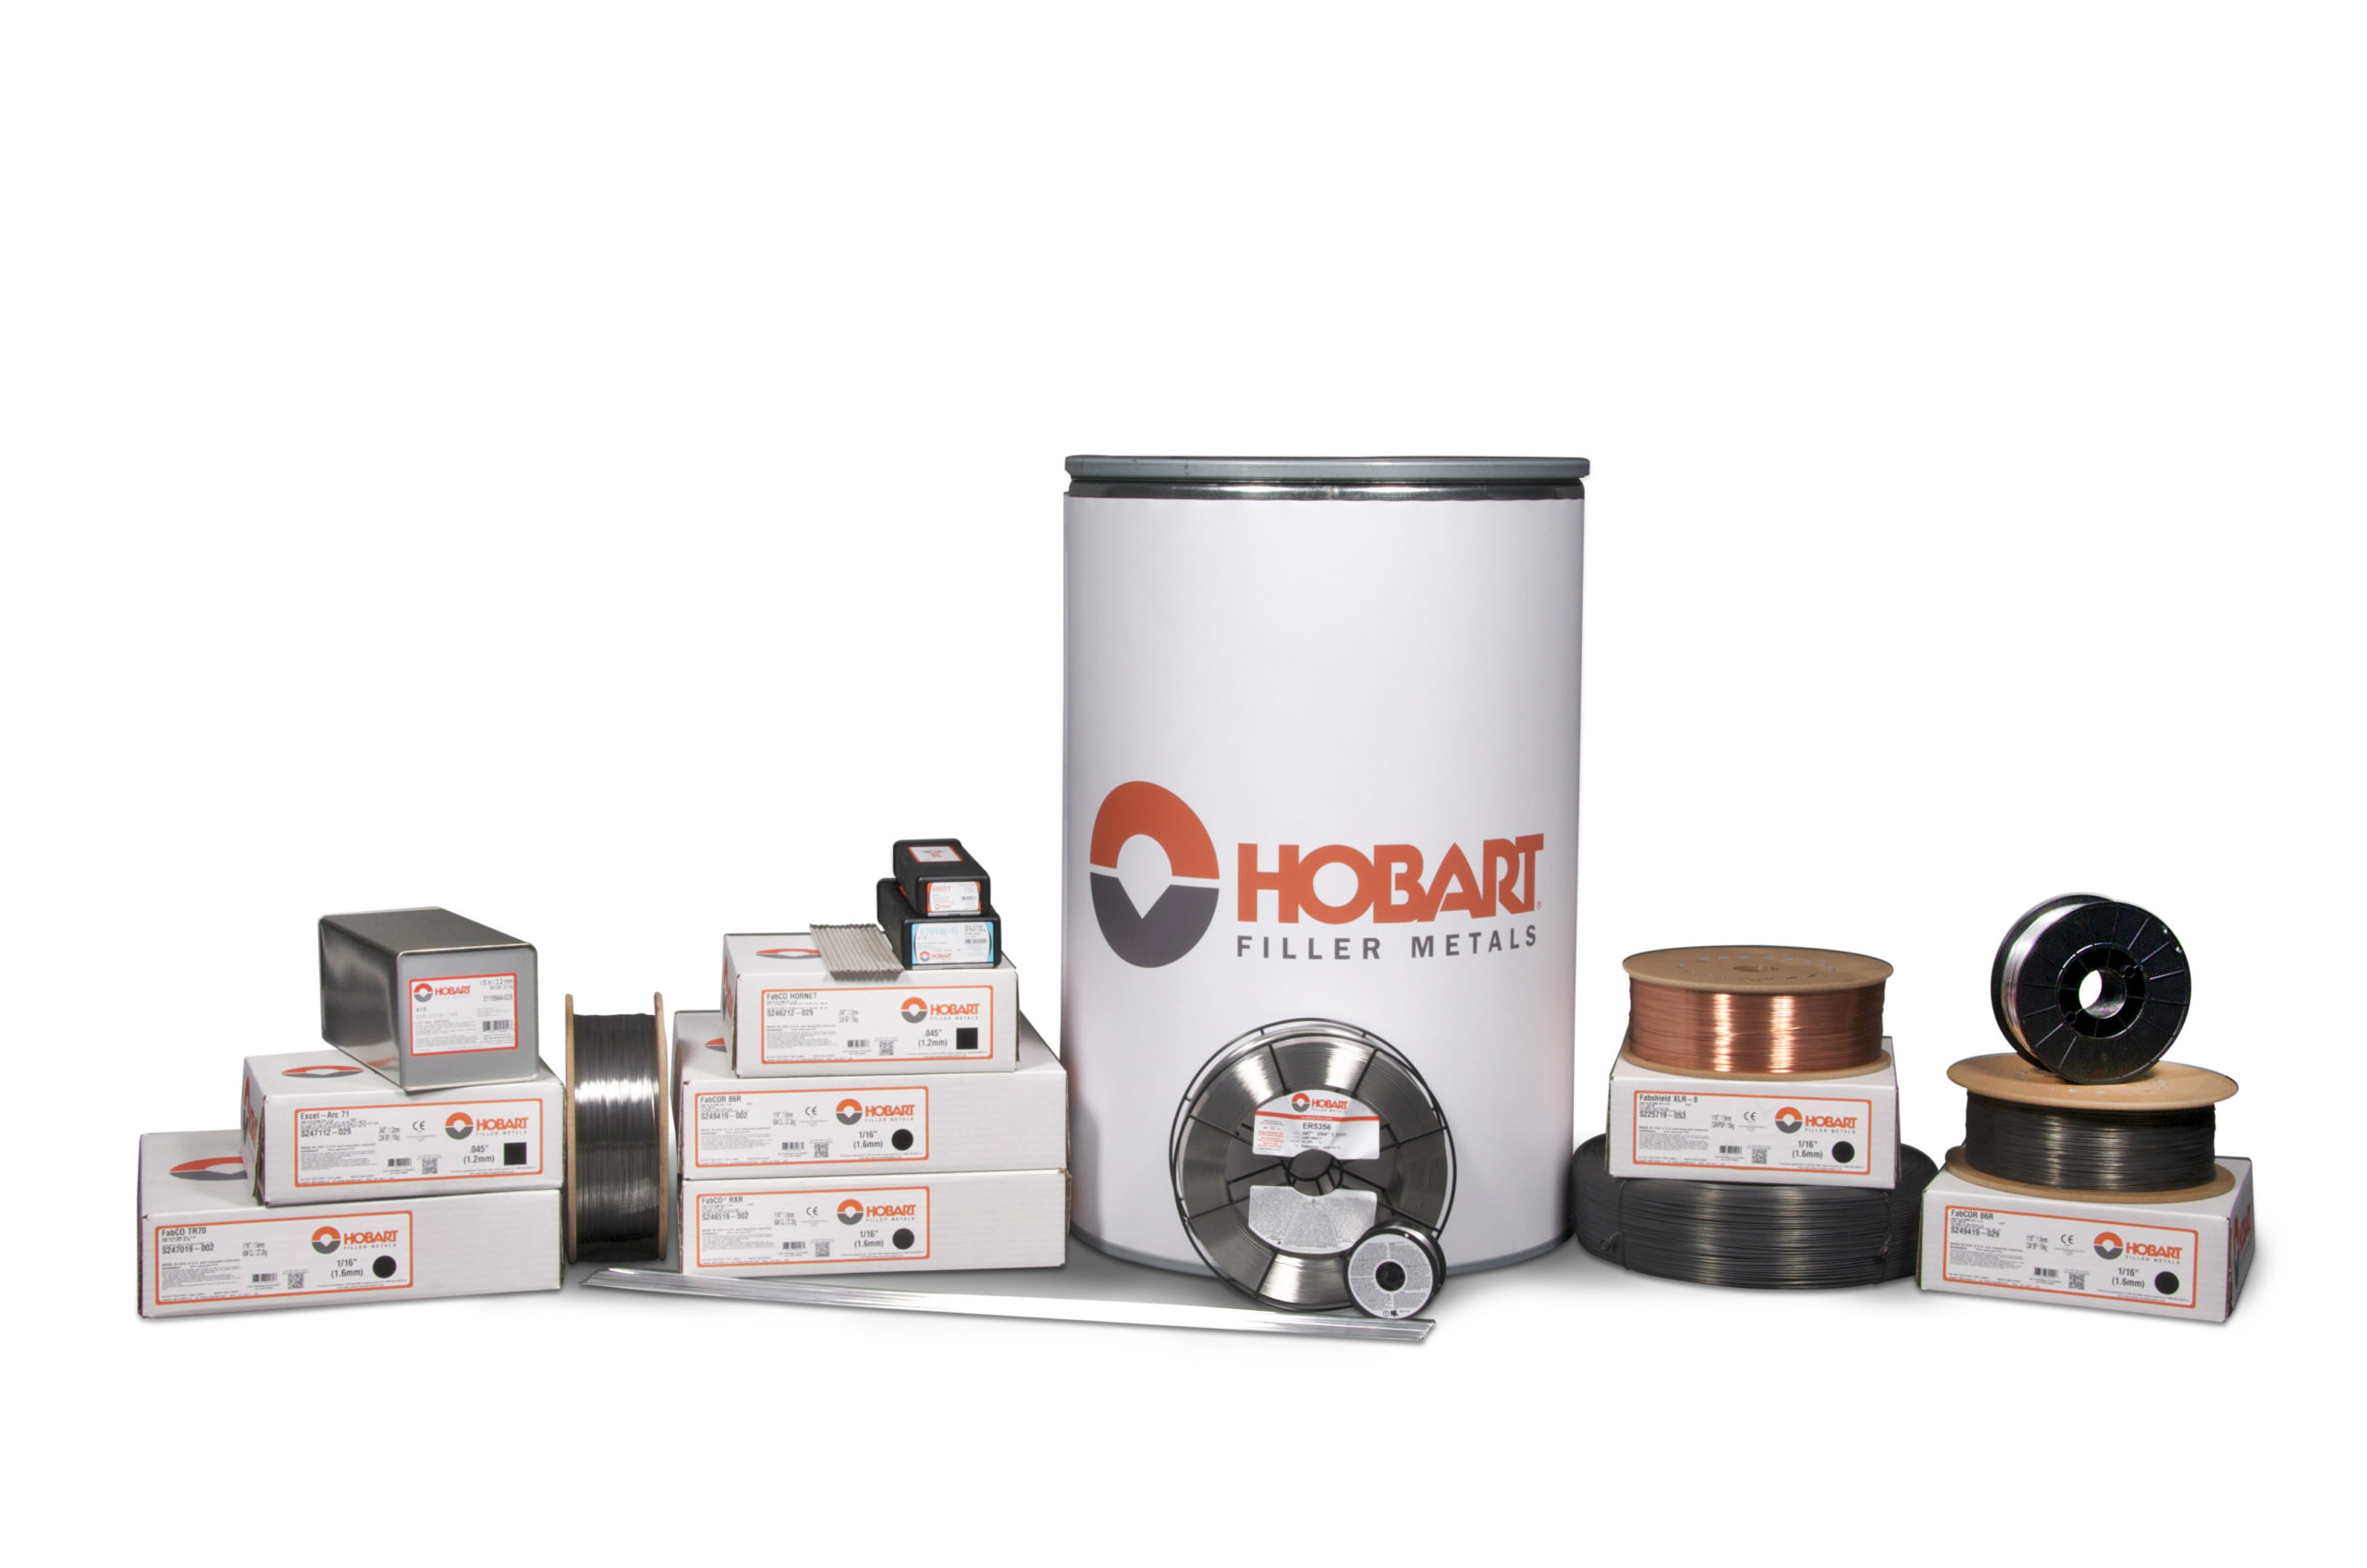 Group photo of Hobart weldng wires, stick electrodes, aluminum products